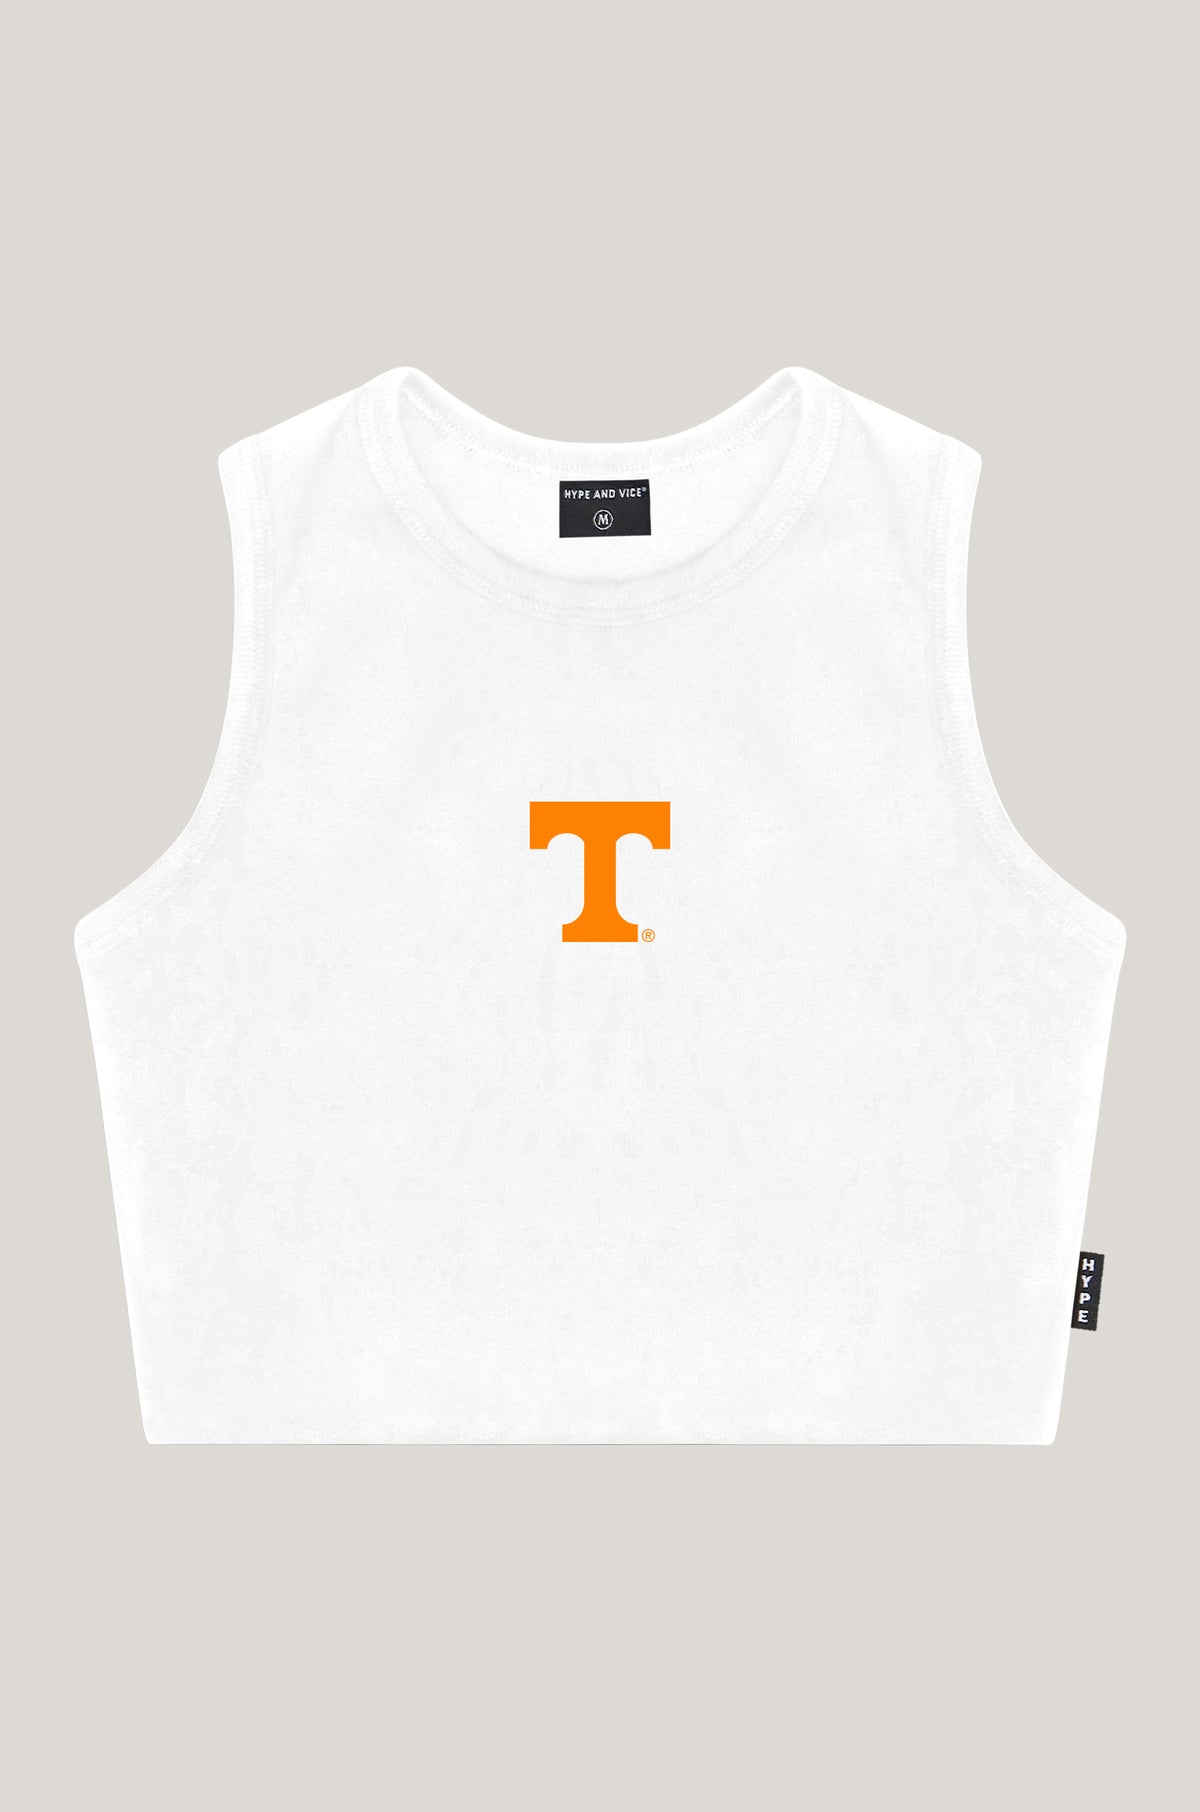 University of Tennessee Cropped Hoodie Medium / Orange and White | Hype and Vice